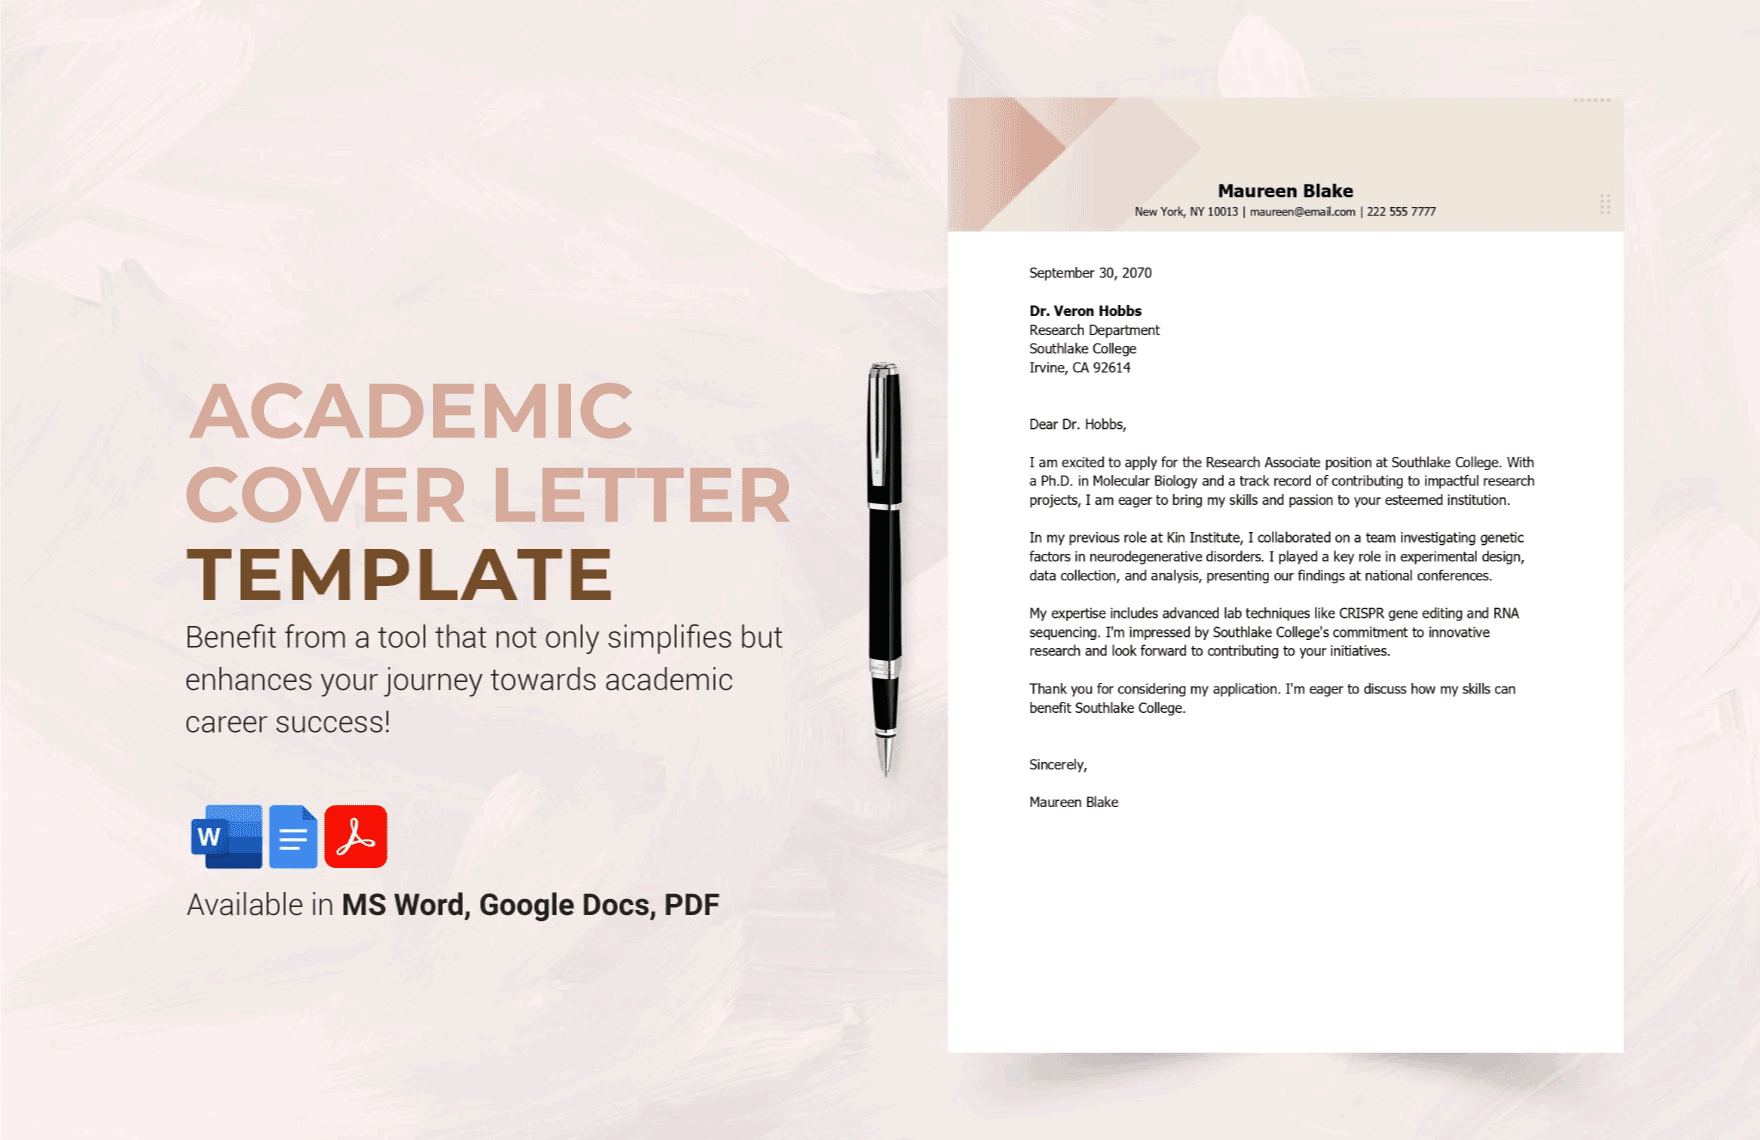 Academic Cover Letter Template in Word, Google Docs, PDF